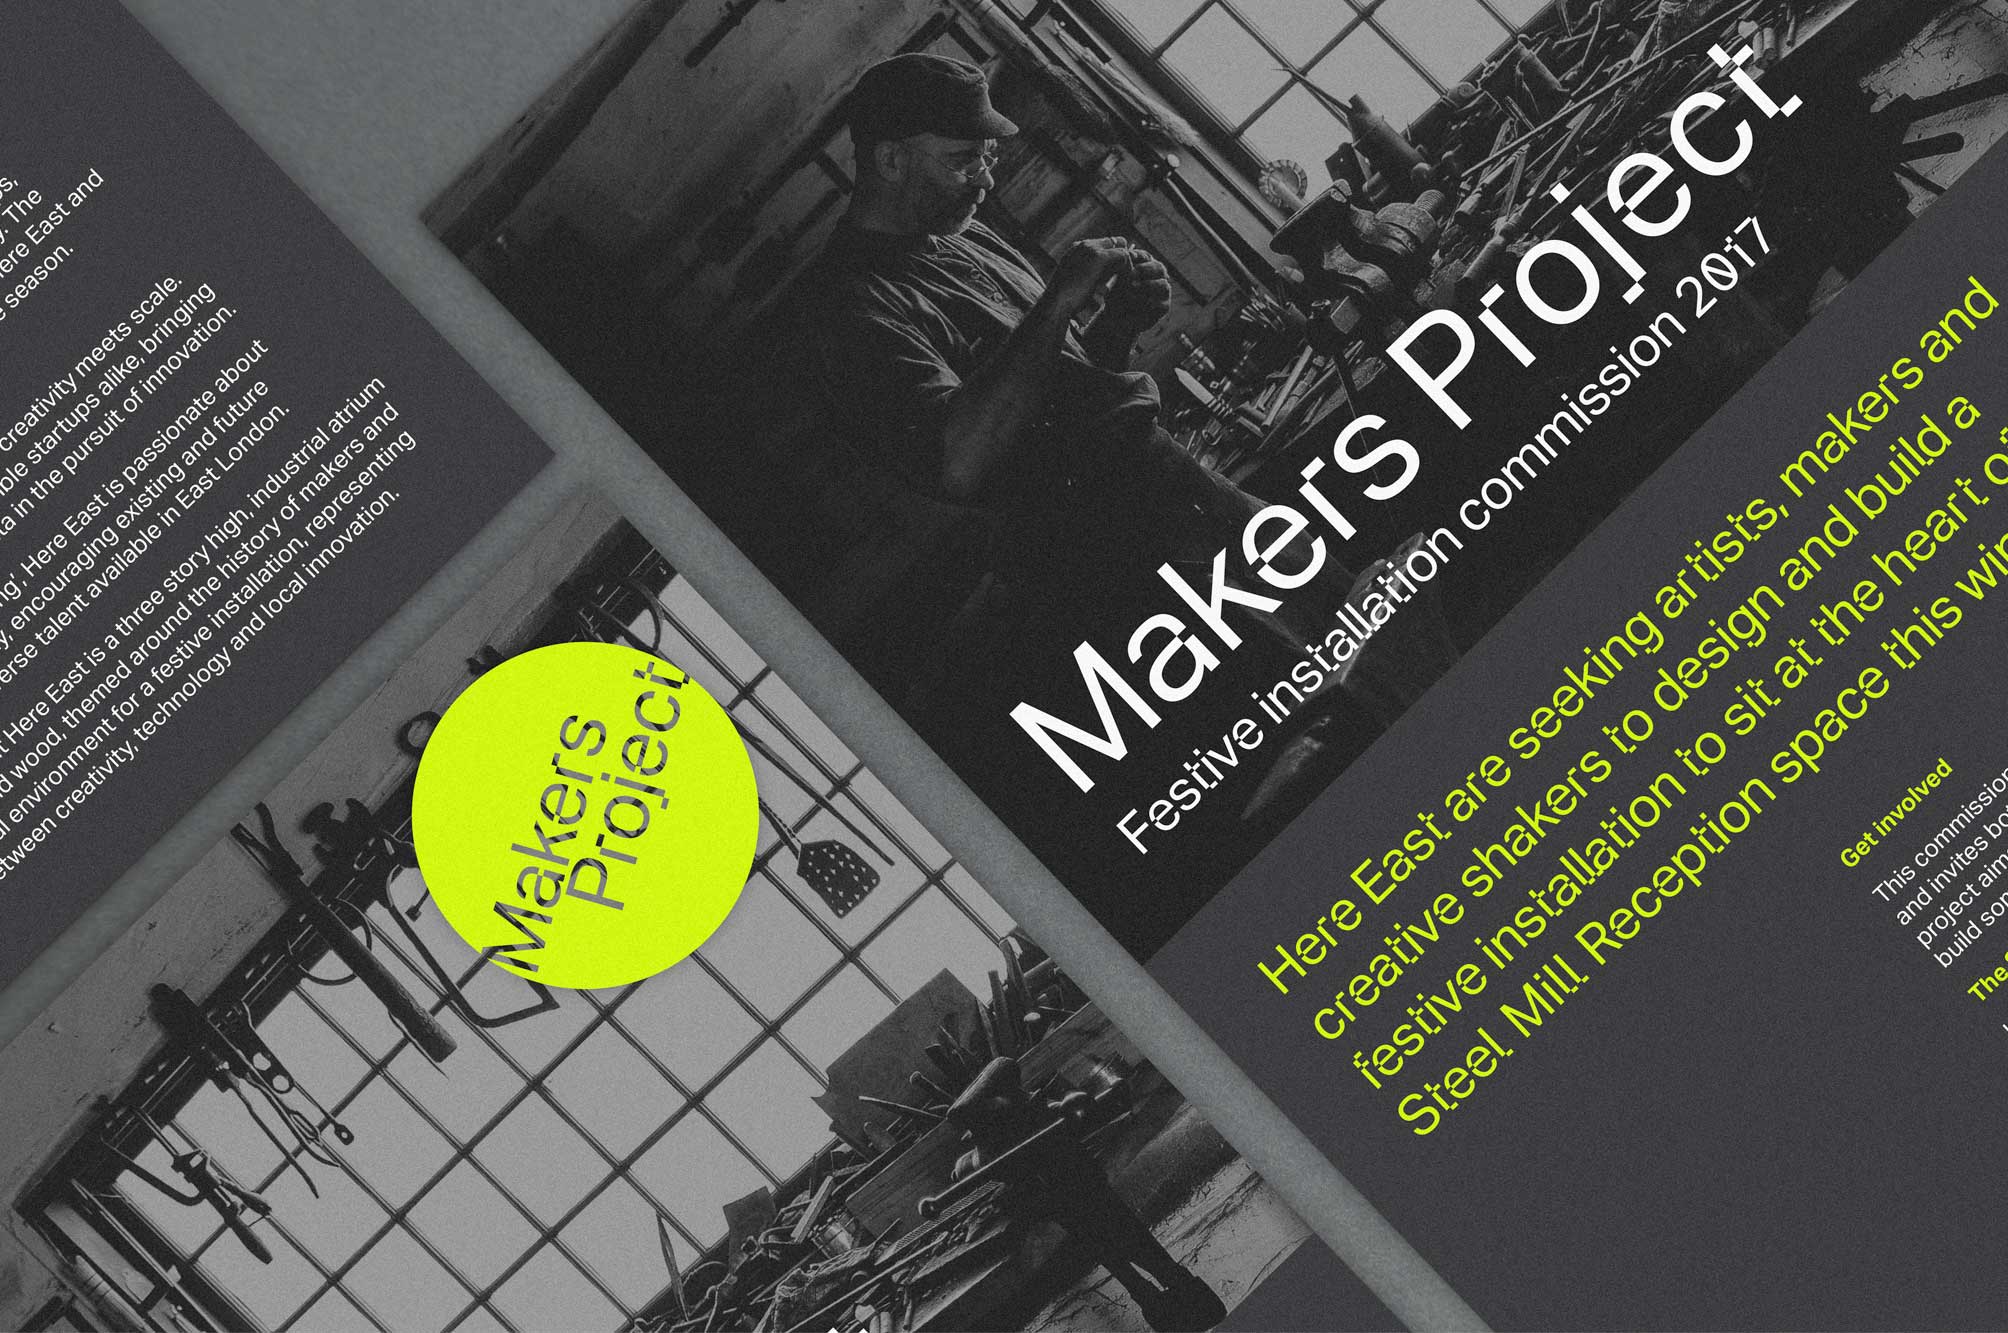 Makers Project A5 flyer artwork